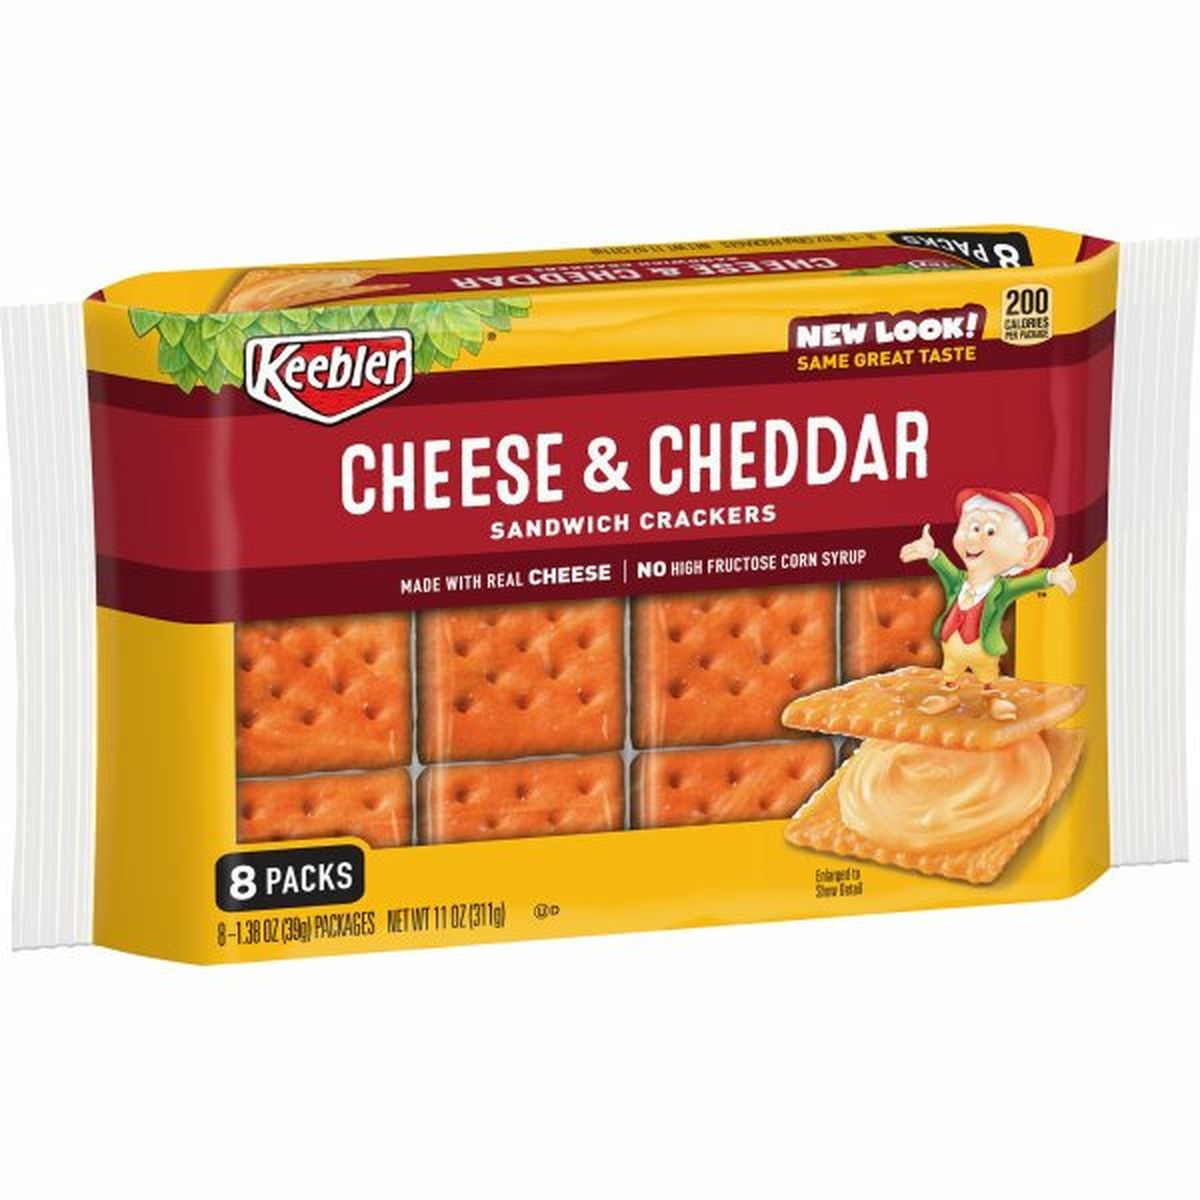 Calories in Keebler Crackers Keebler Sandwich Crackers, Cheese and Cheddar, Just Grab N' Go Single Serve, 8ct 11oz